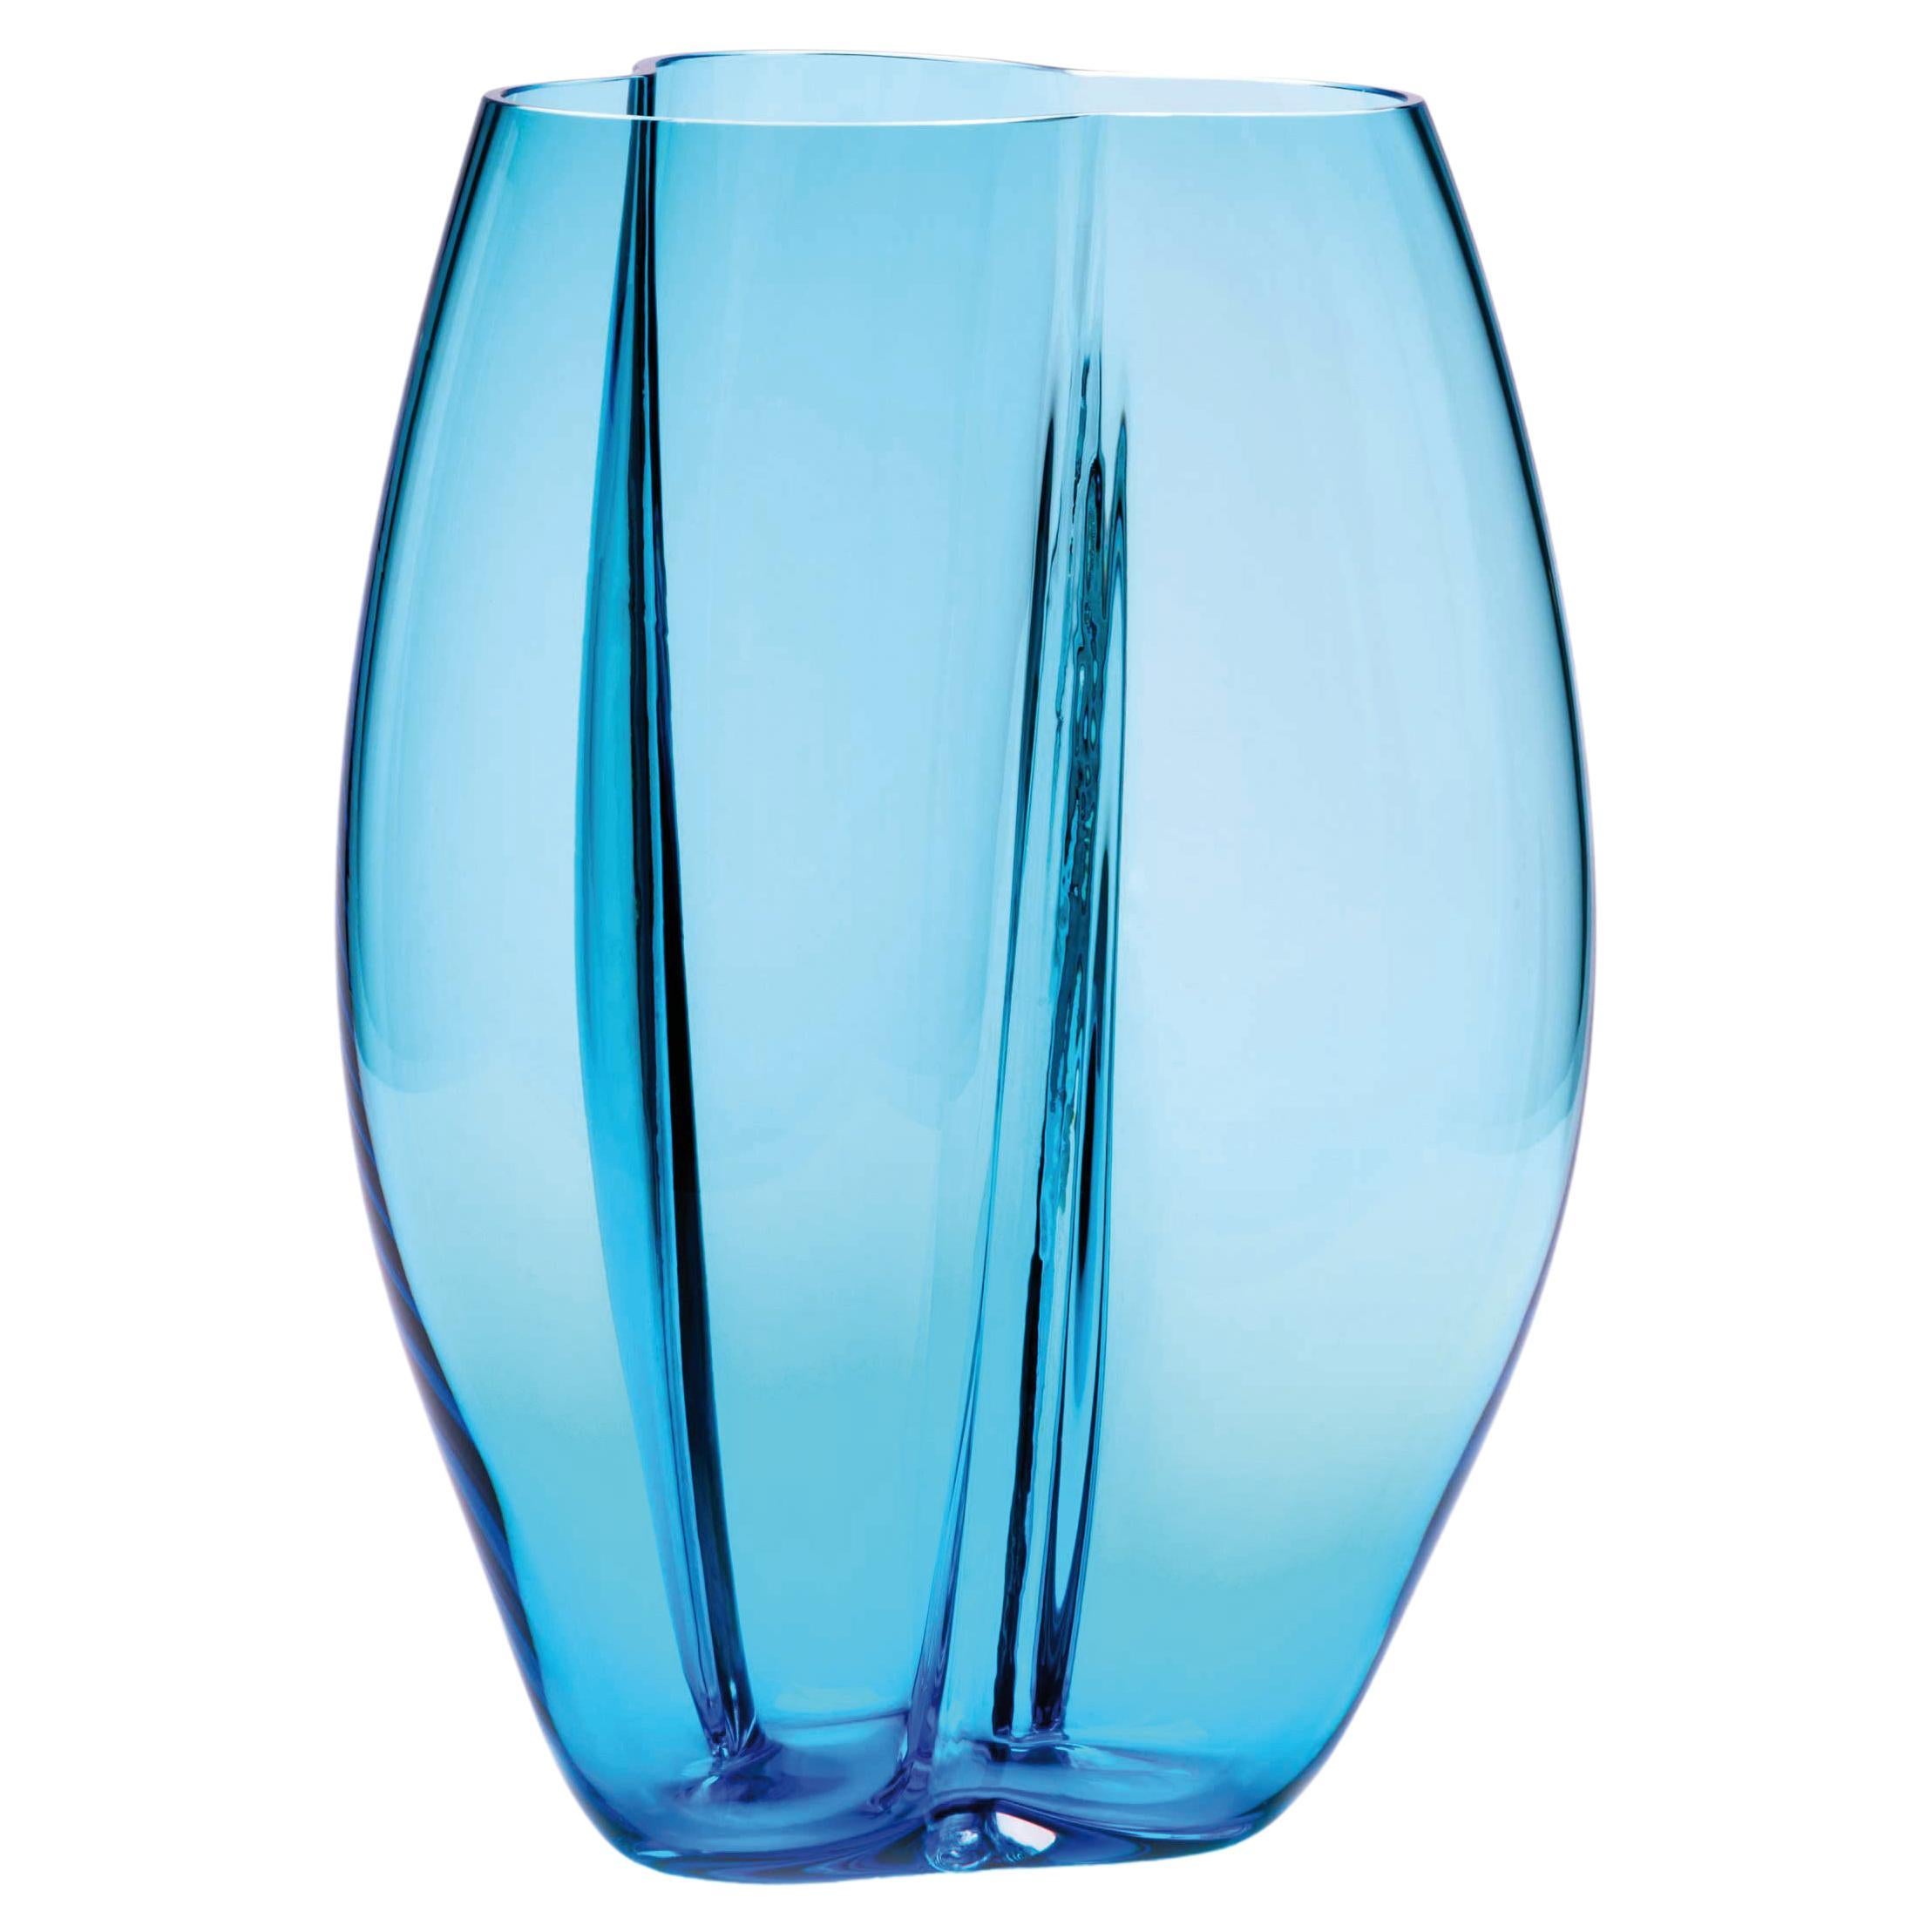 Petalo Blue Small Vase by Purho For Sale